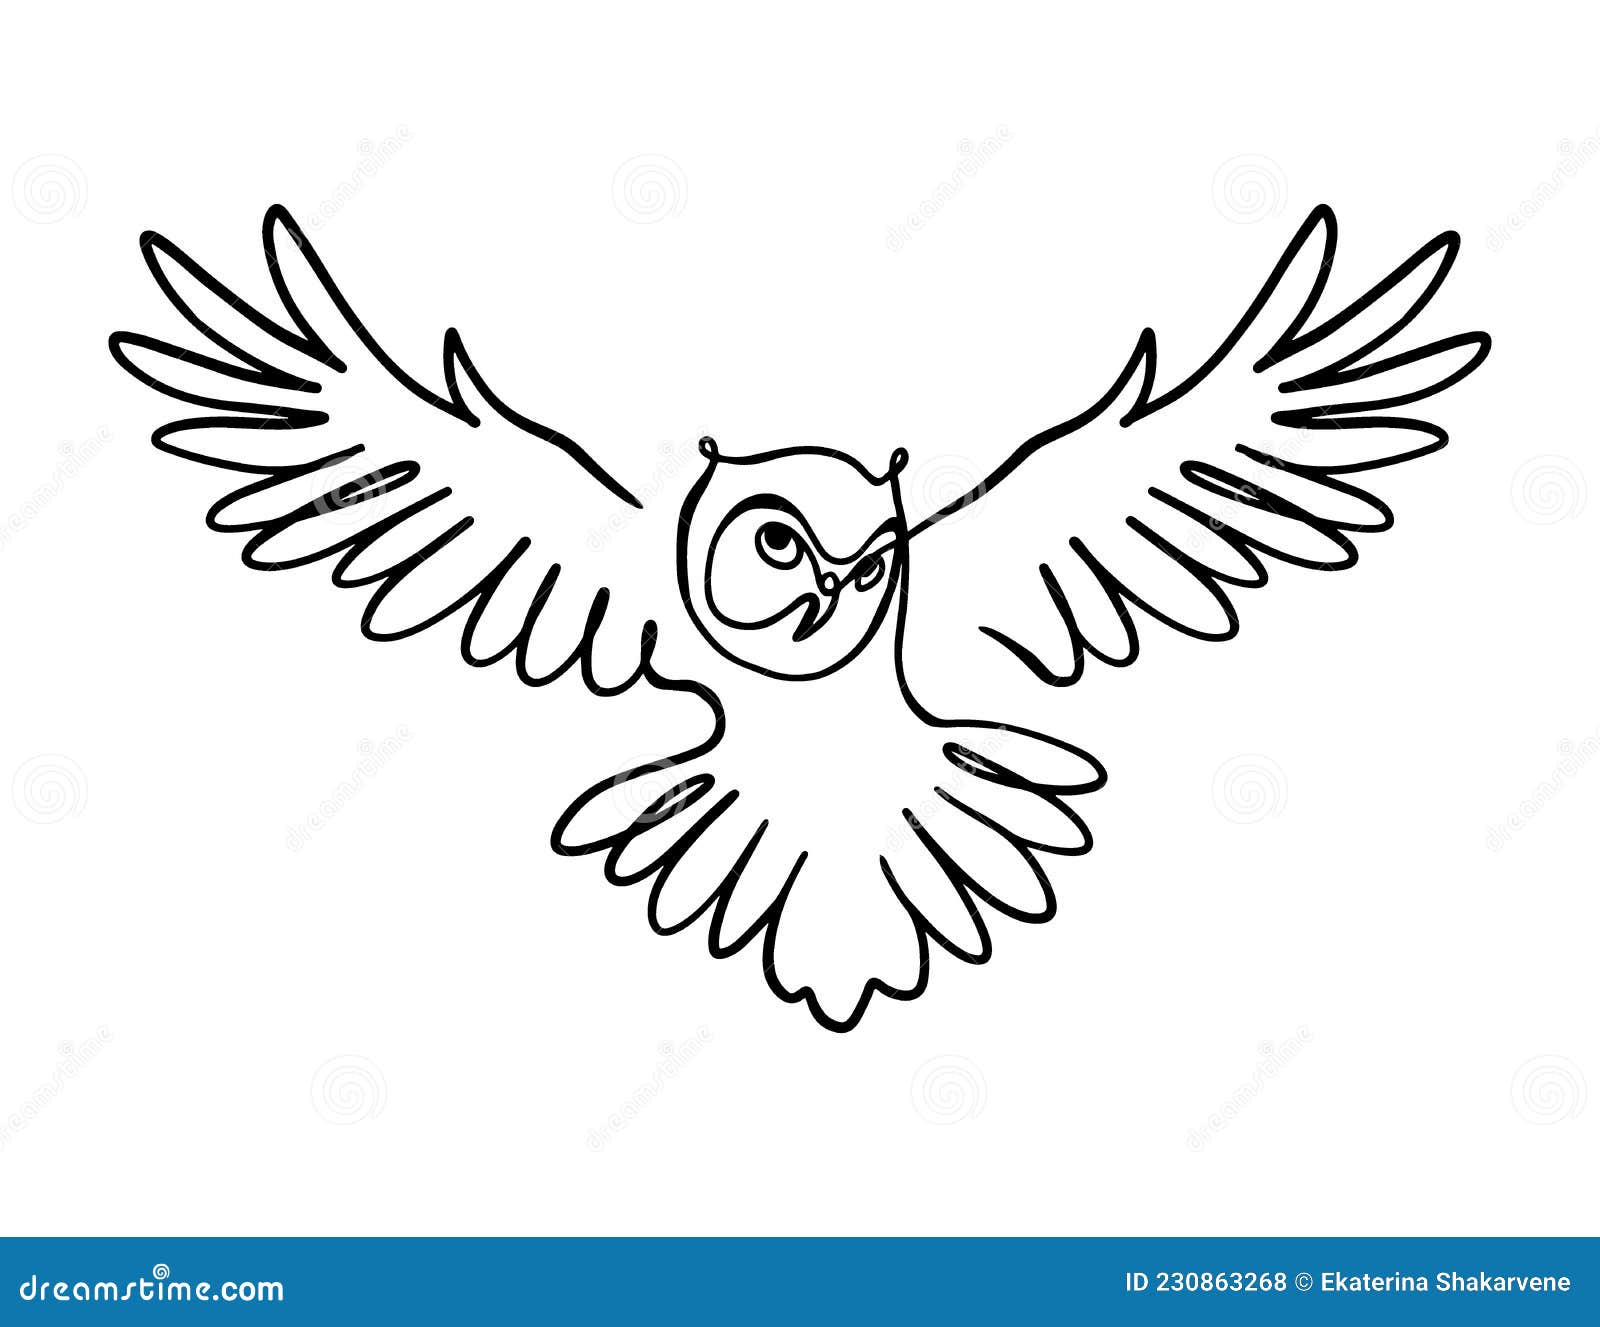 4788 Owl Tattoo Outline Images Stock Photos  Vectors  Shutterstock